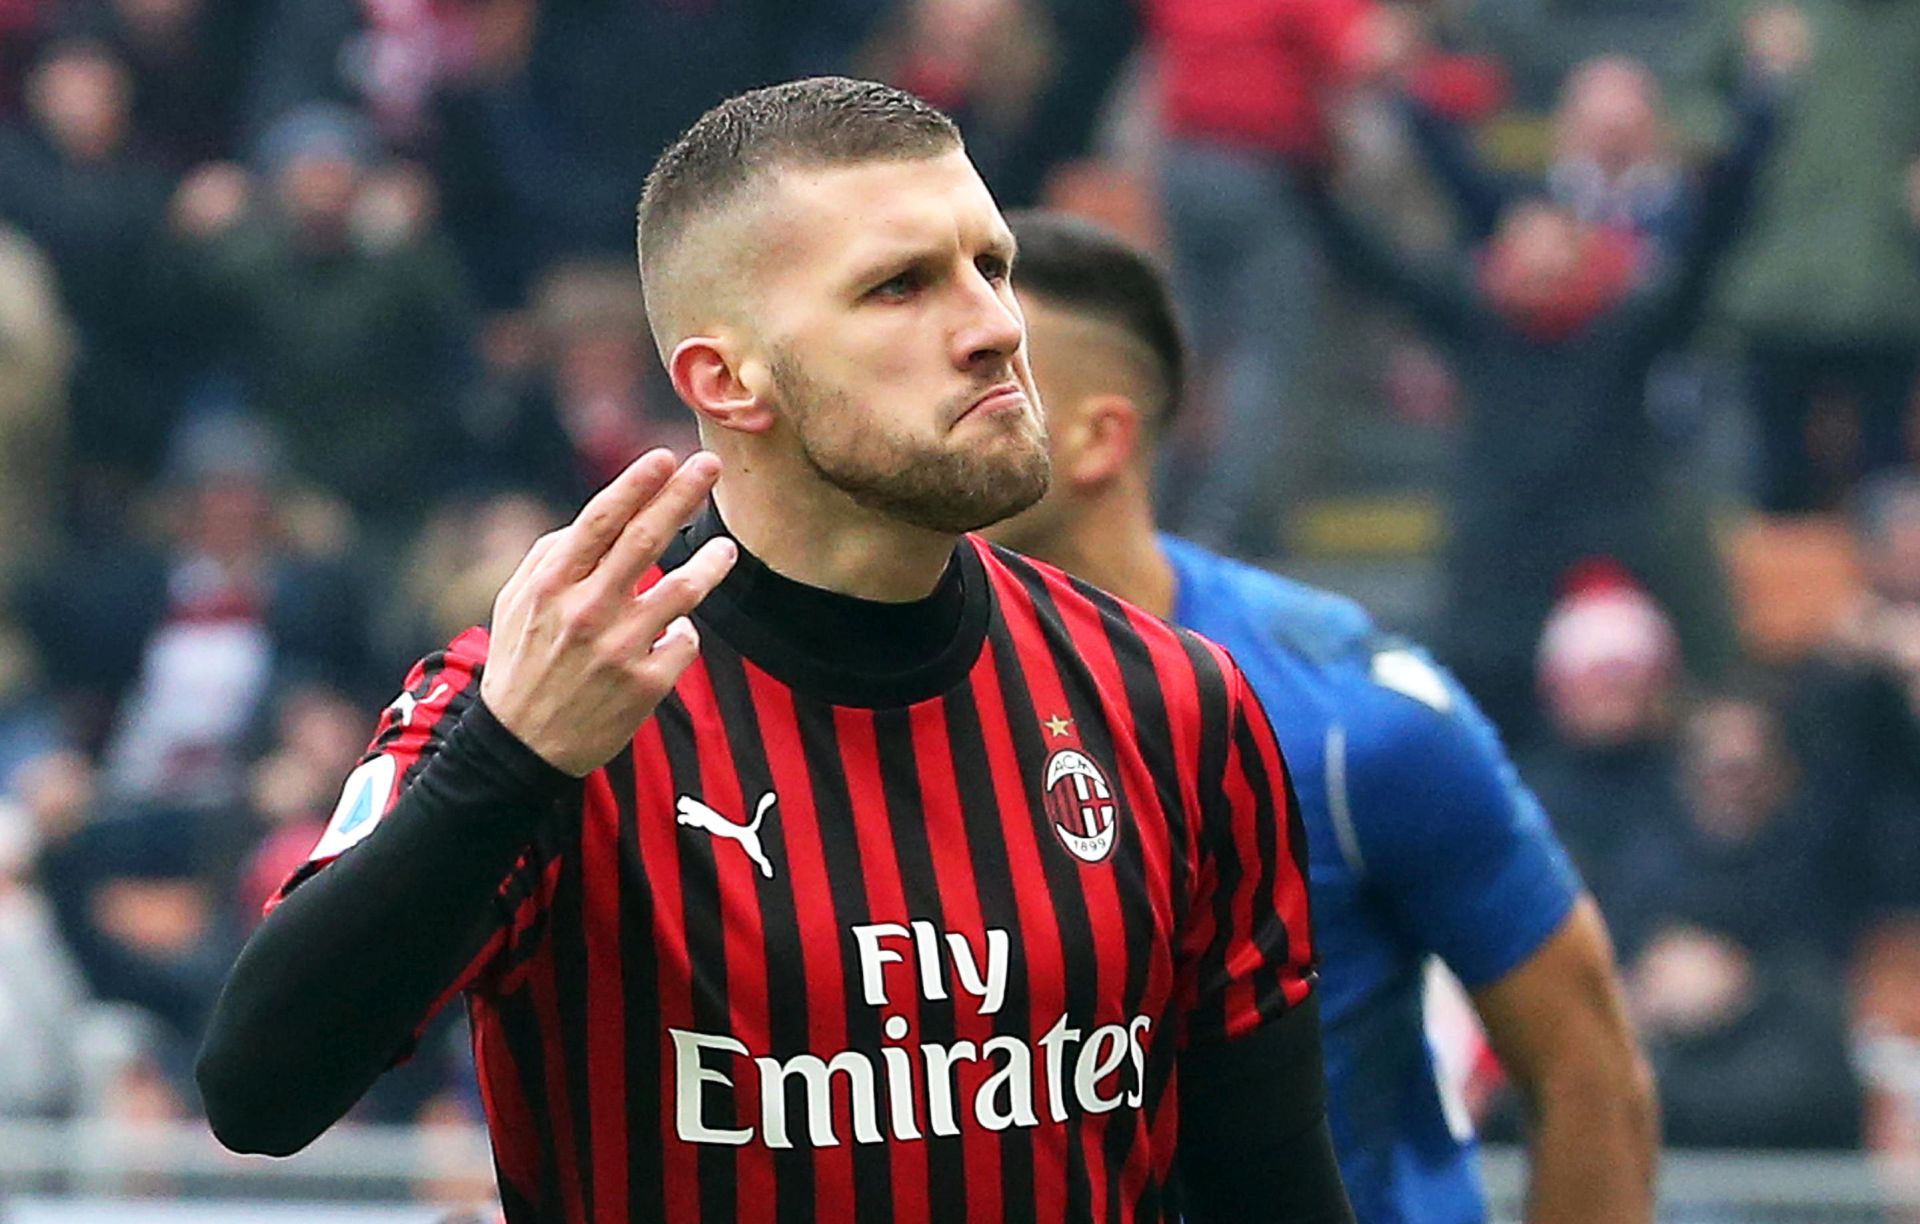 epa08140834 Milan's Ante Rebic reacts after scoring the 1-1 equalizer during the Italian Serie A soccer match between AC Milan and Udinese Calcio at Giuseppe Meazza stadium in Milan, Italy, 19 January 2020.  EPA/MATTEO BAZZI